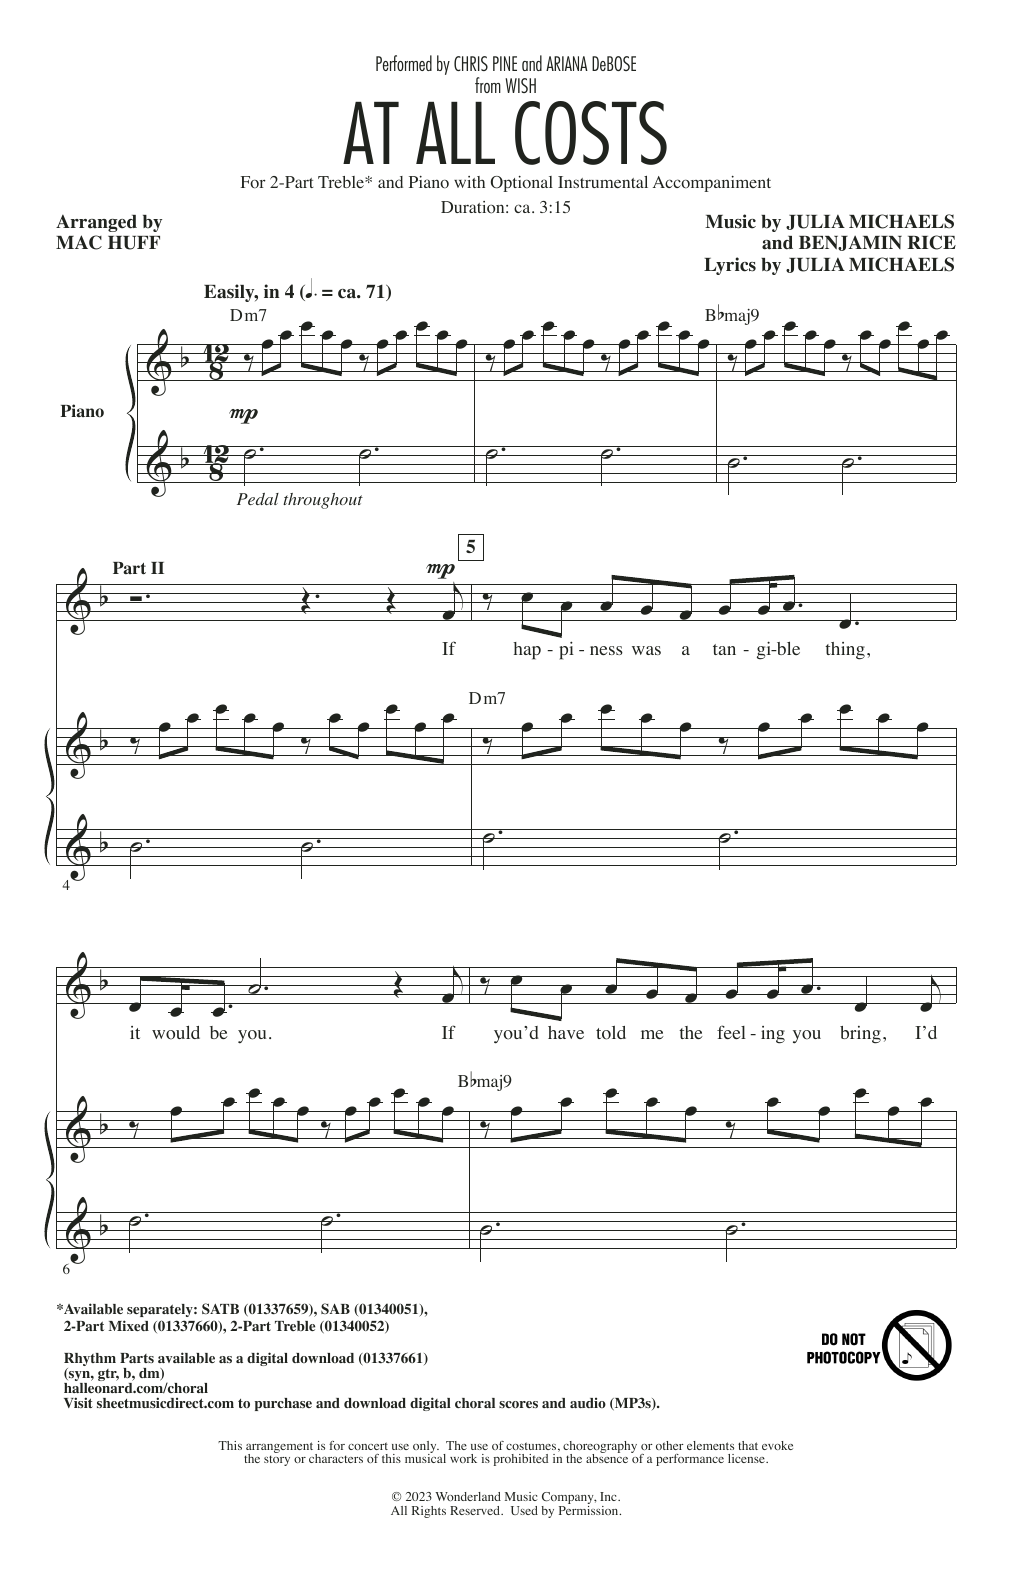 Chris Pine and Ariana DeBose At All Costs (from Wish) (arr. Mac Huff) sheet music notes printable PDF score